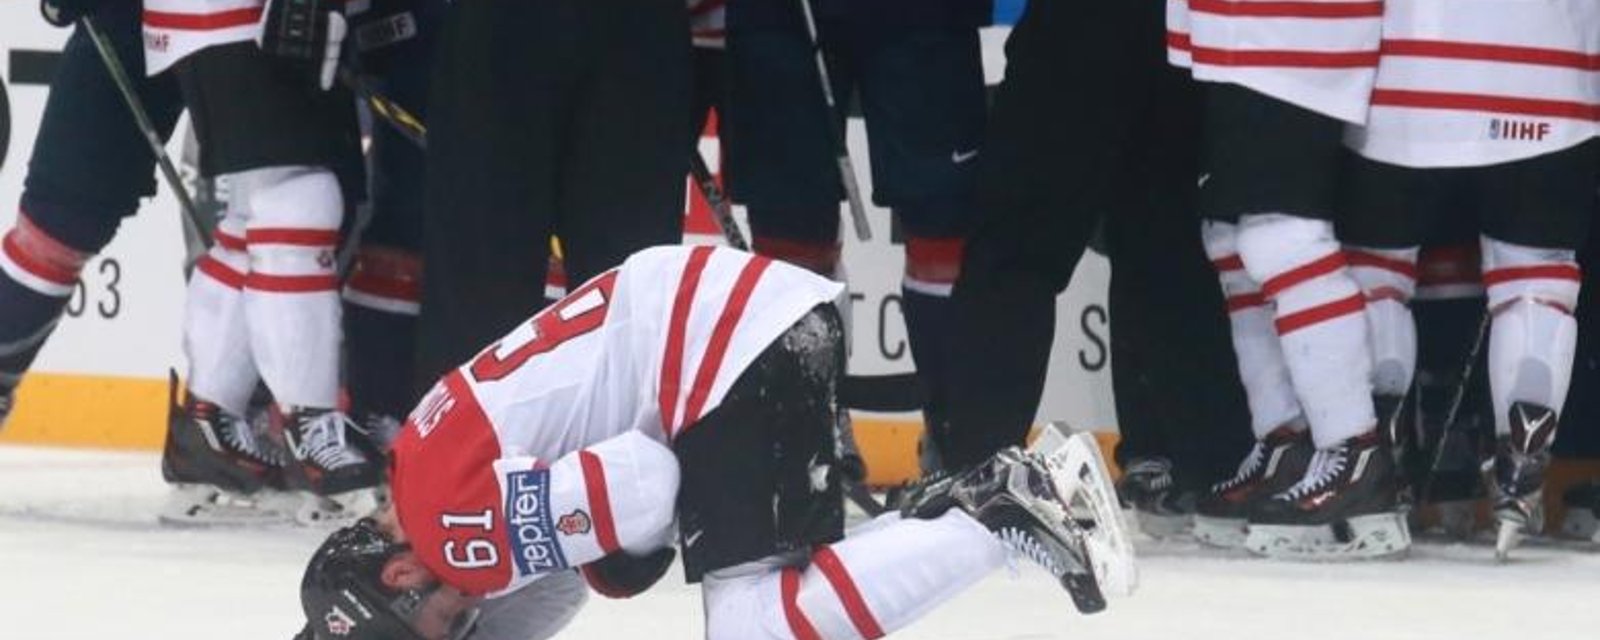 Team Canada star shaken up after nasty hit from behind.